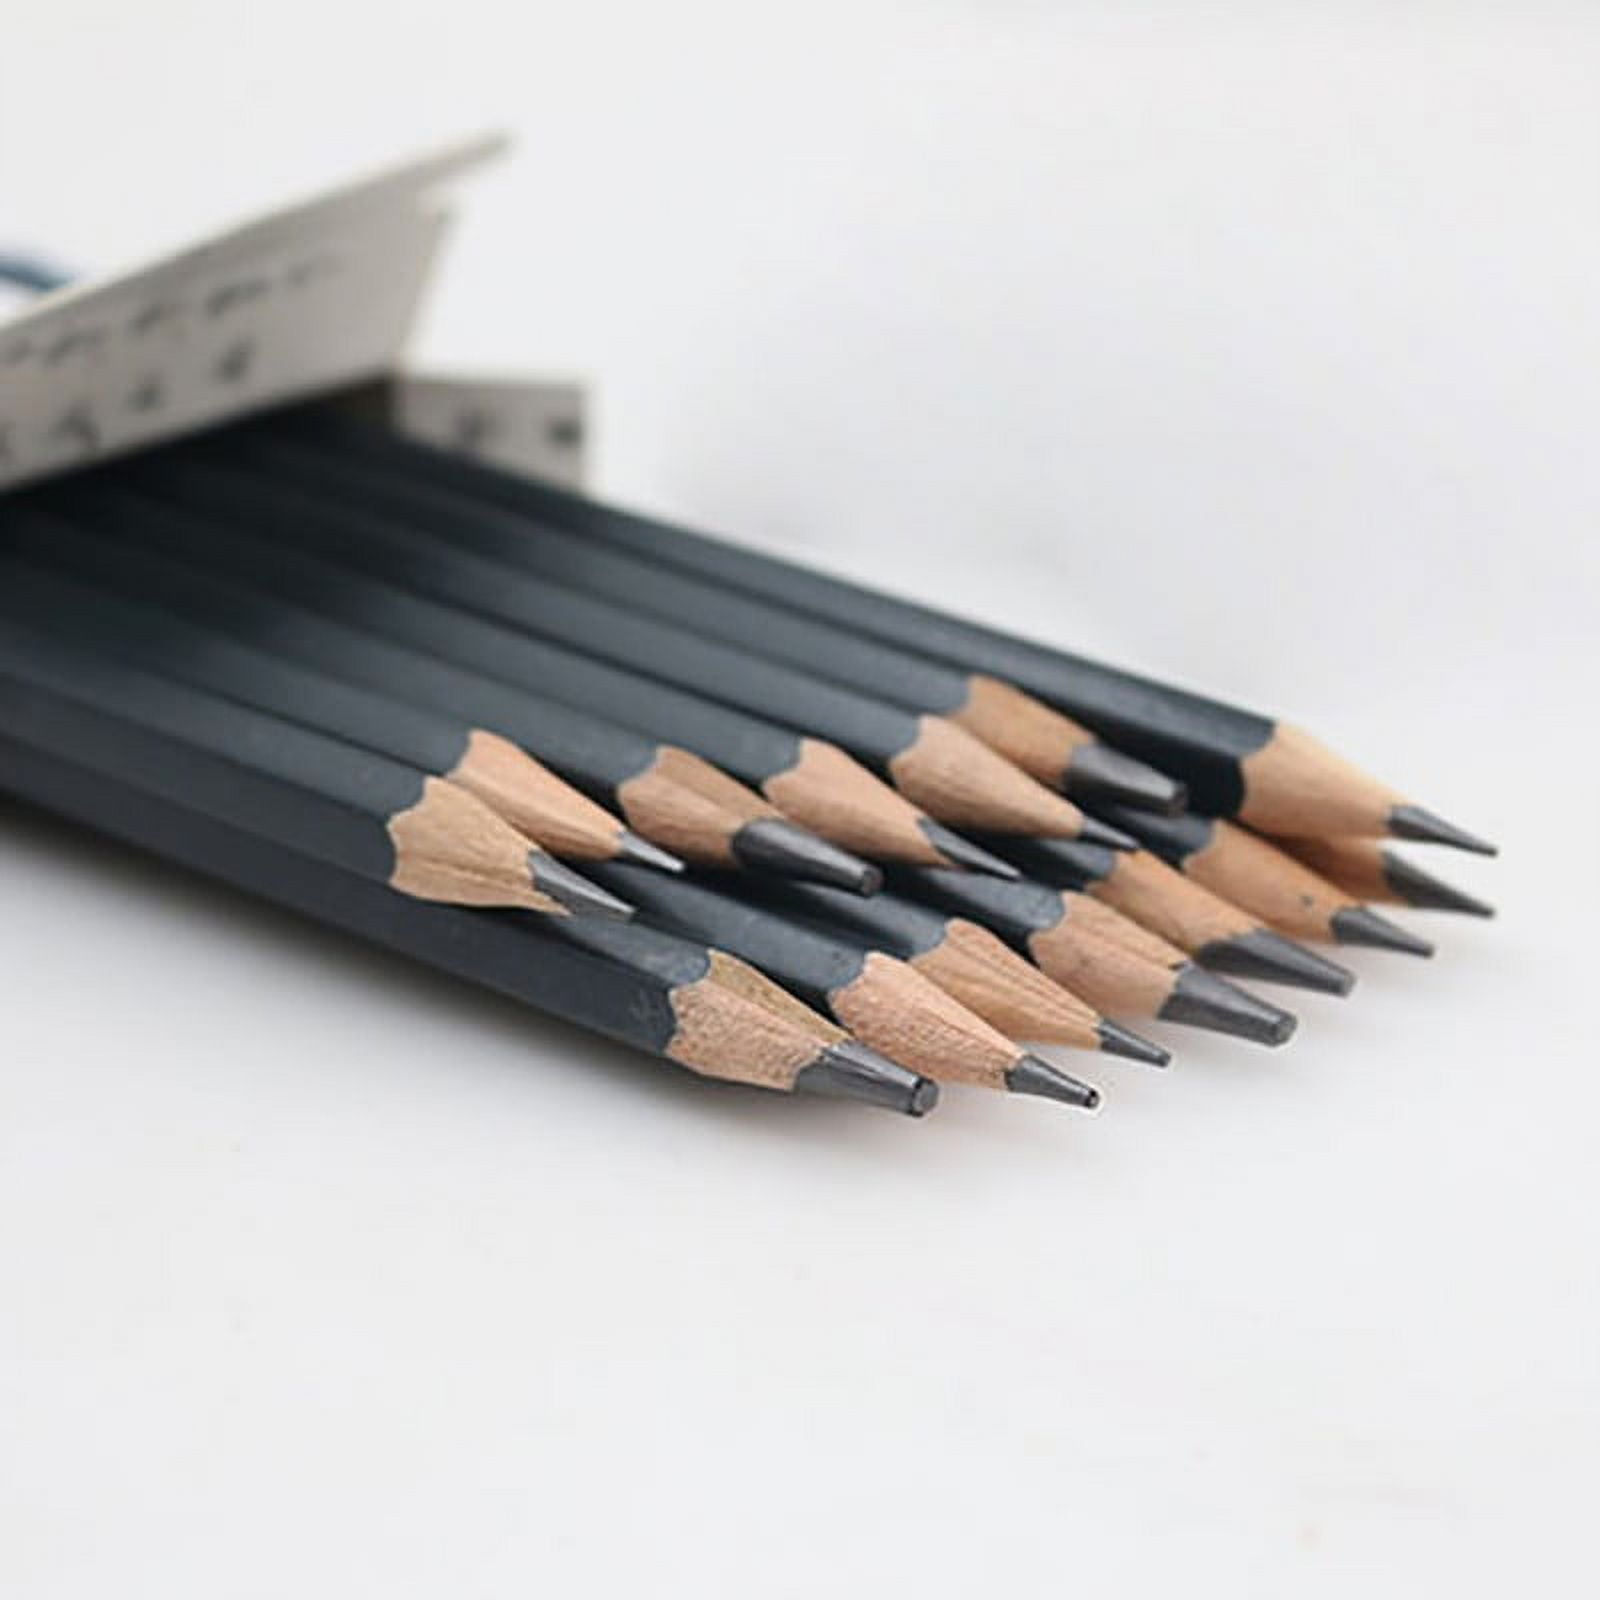 Casewin 12Pcs Sketching Pencils 8B-2H Drawing Pencils Shading Pencils  Wooden Lead Pencils Art Pencils Sketch Pencils for Artists, Beginners,  Students